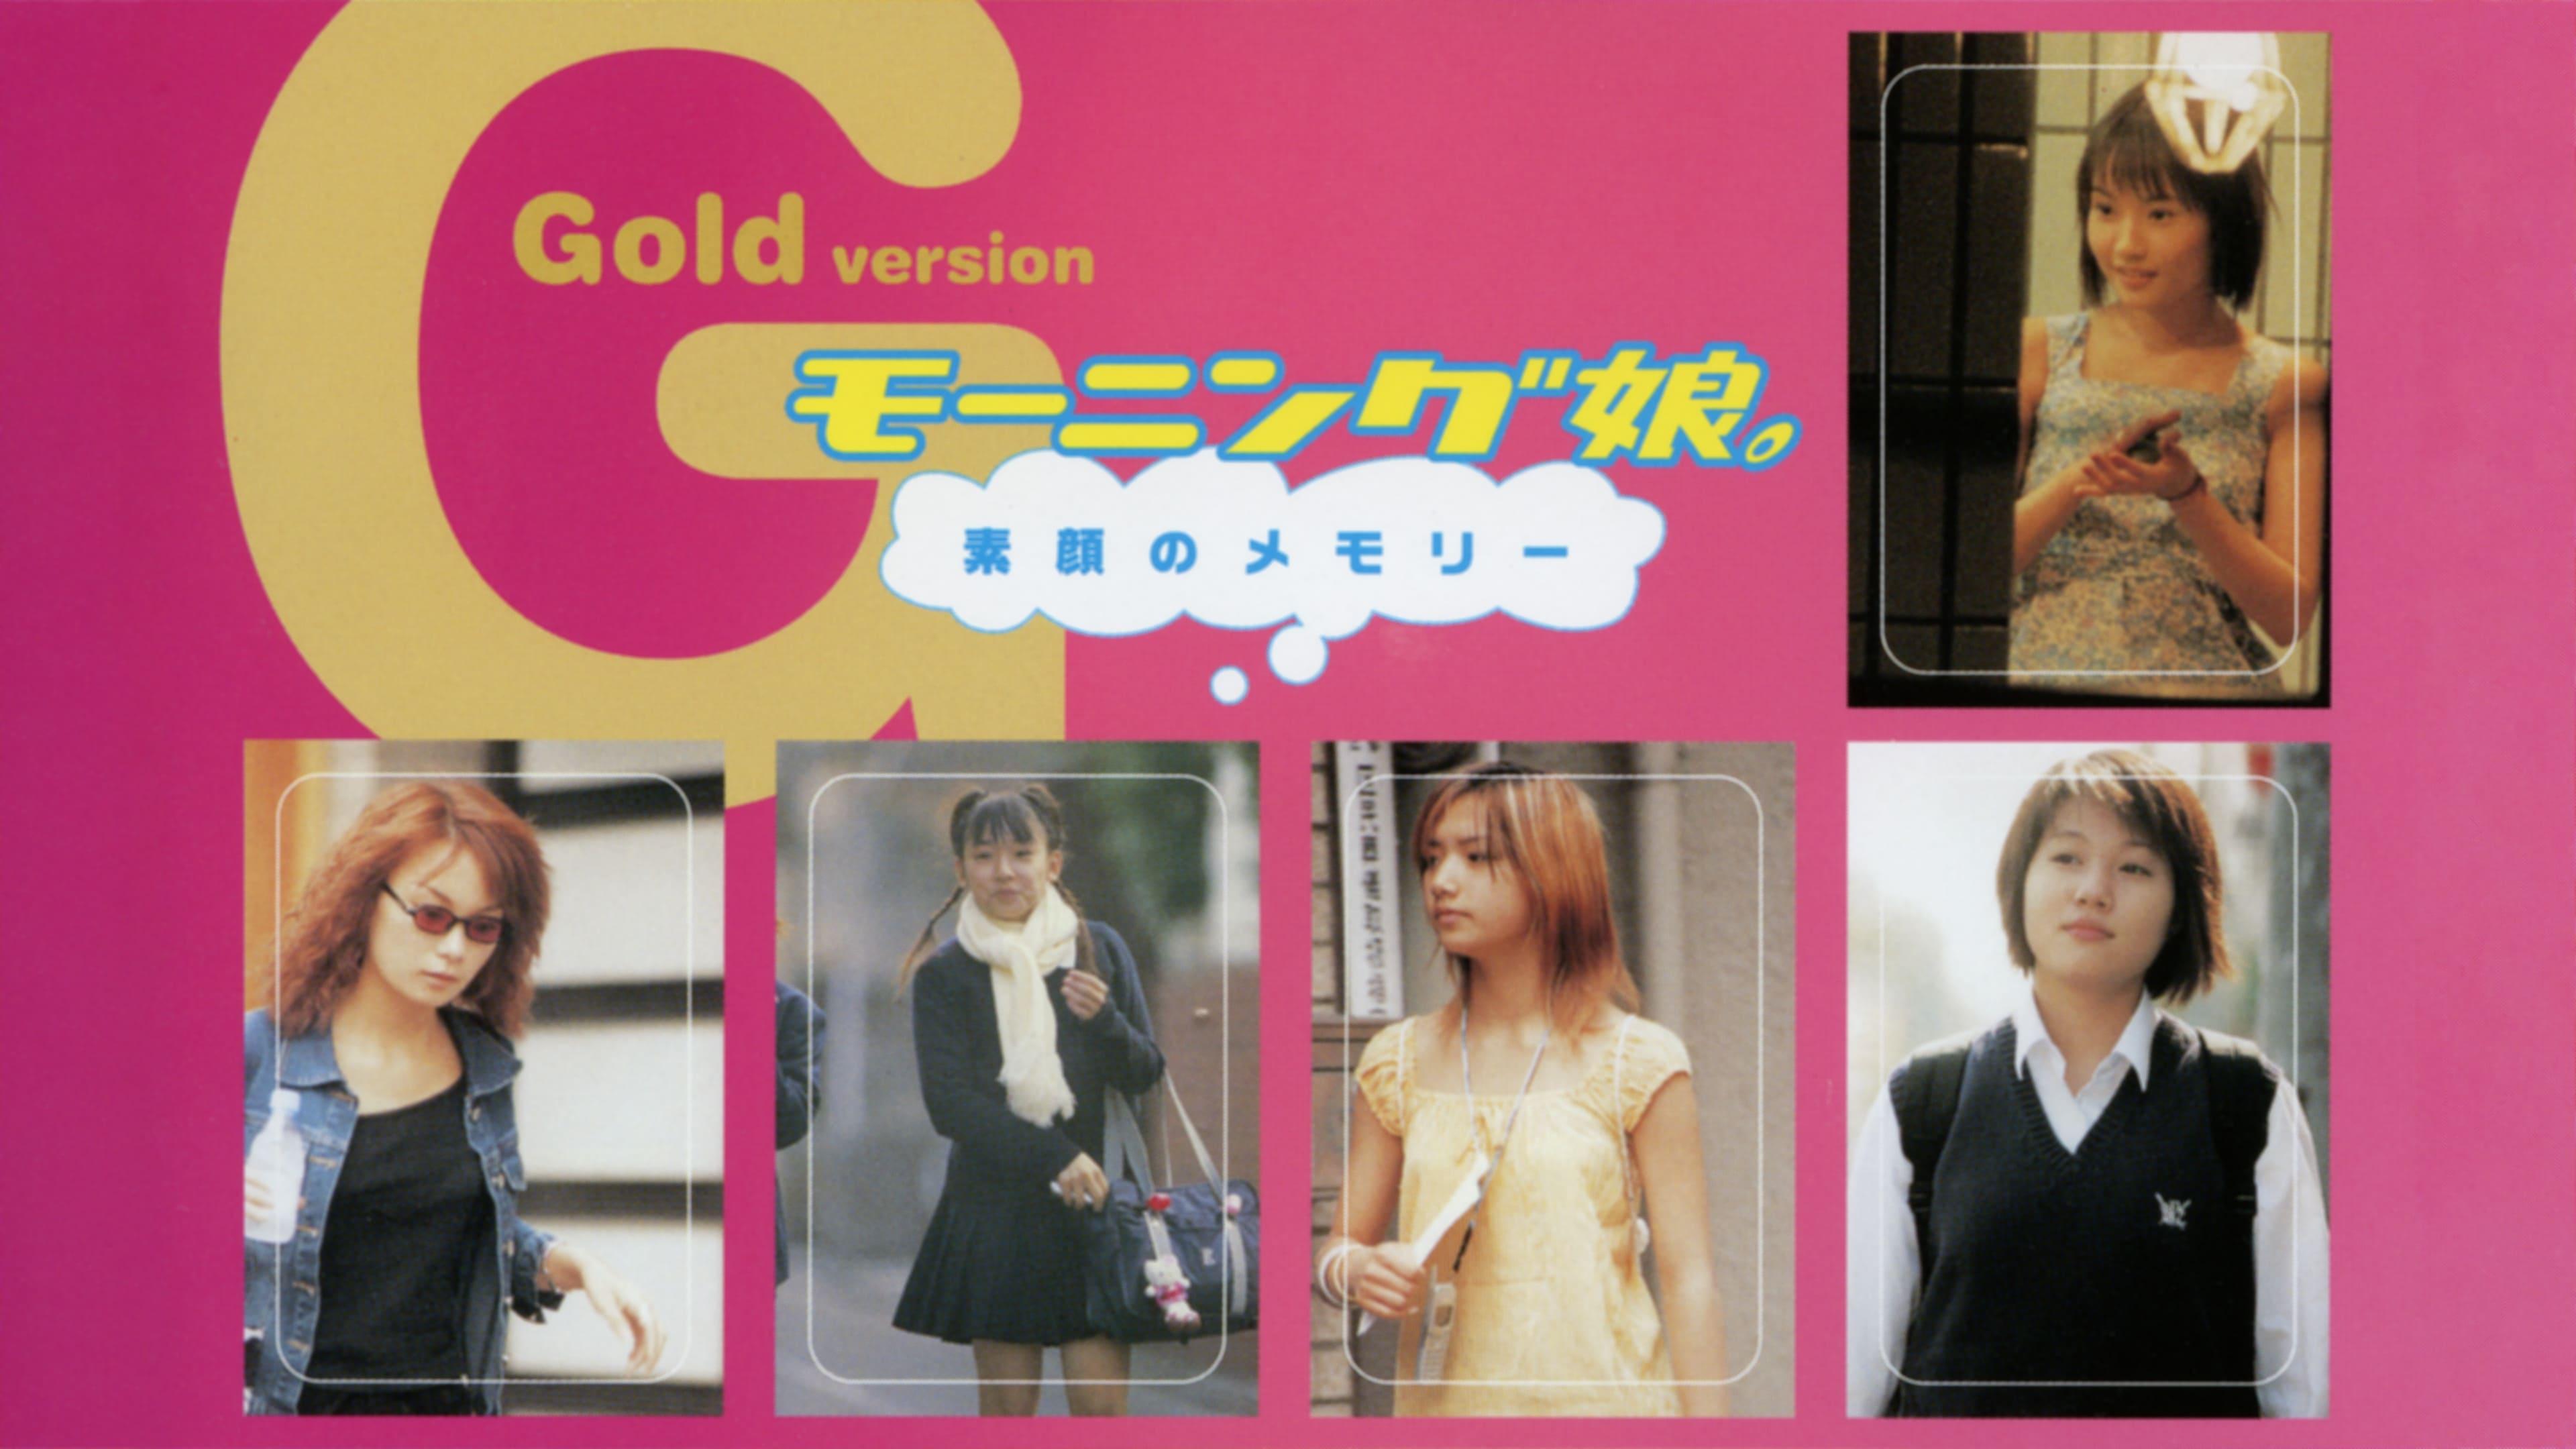 Morning Musume. Unmade-up Memories GOLD backdrop